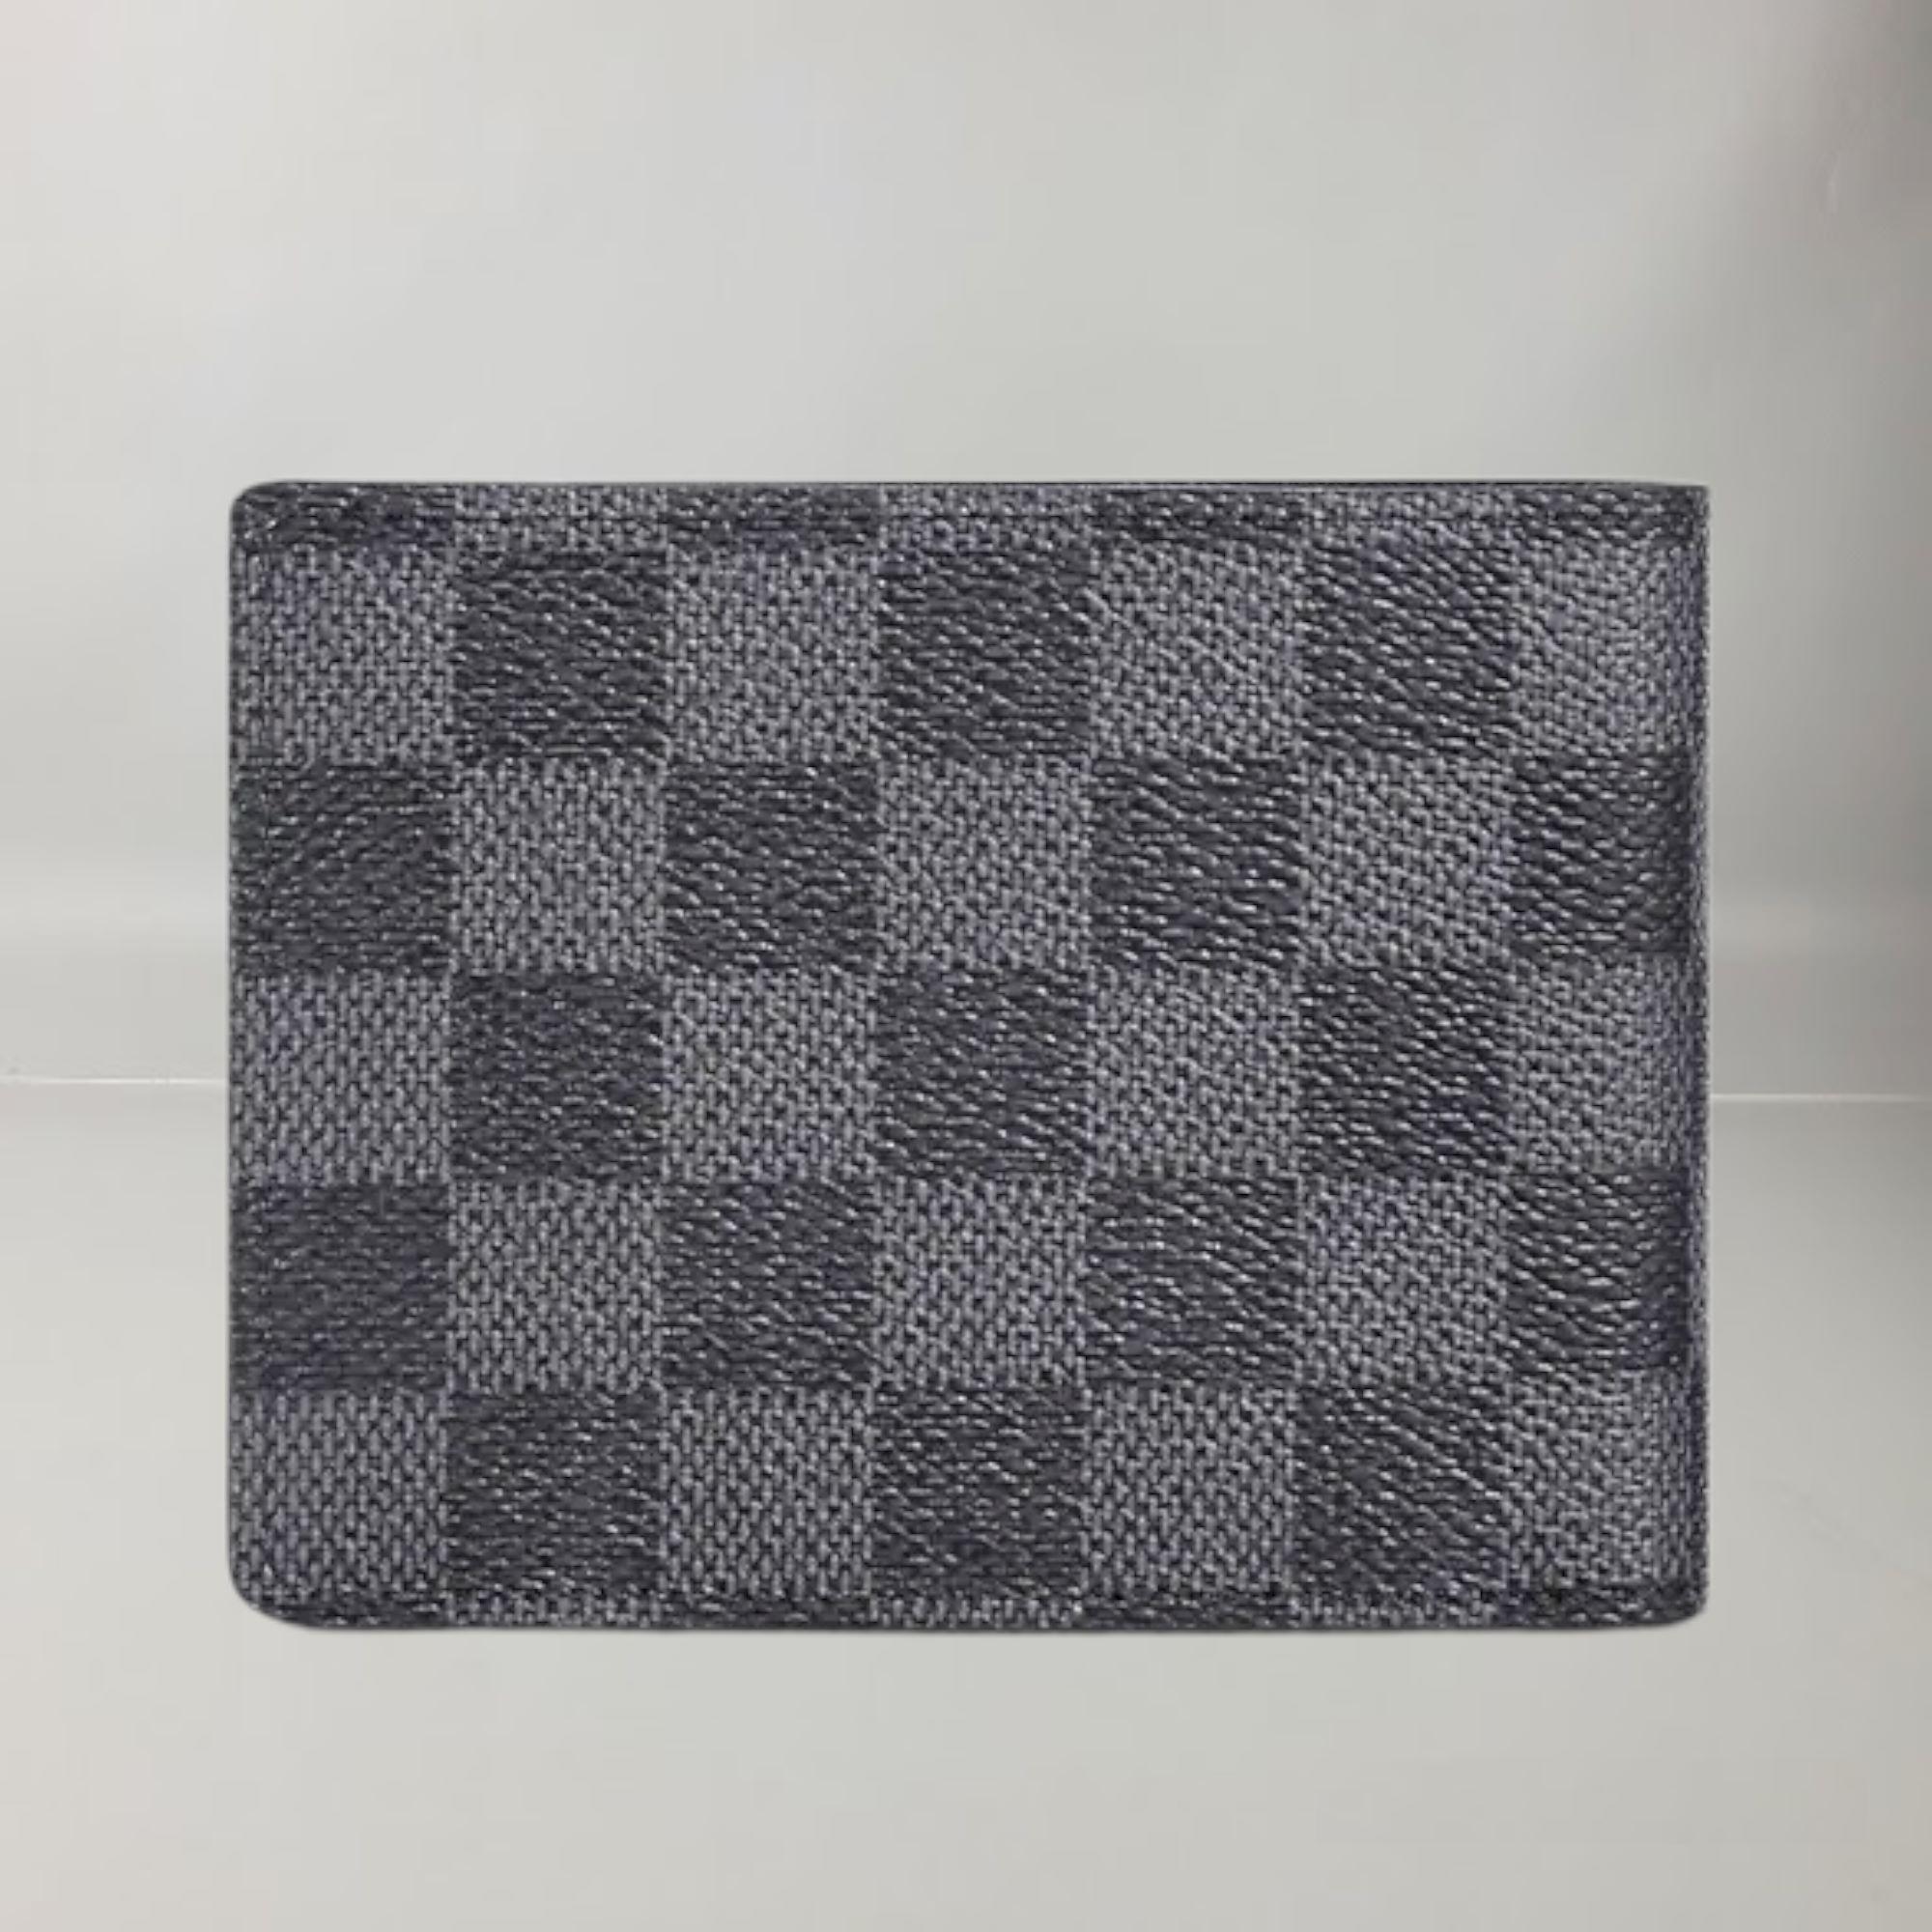 Gray Damier Graphite 3D canvas
Black cowhide leather trim
Textile lining
Silver metallic finishes
Three credit card slots
Two slots for business cards
Two compartments for bills
Two side slots for receipts